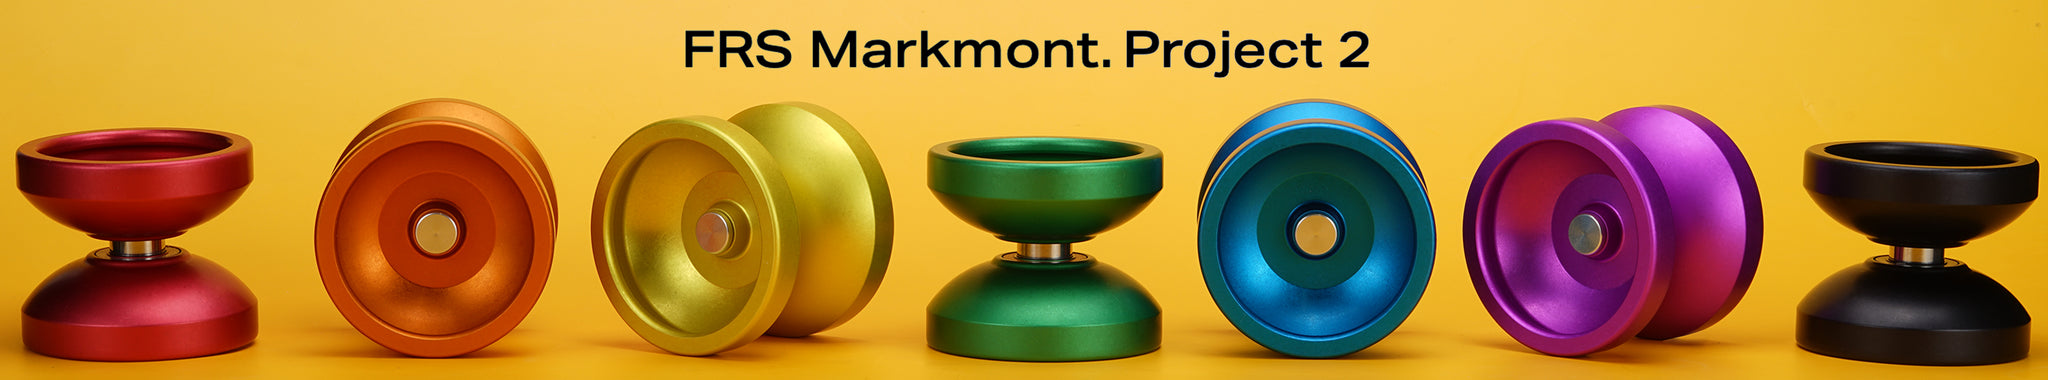 Project 2 by MarkMont